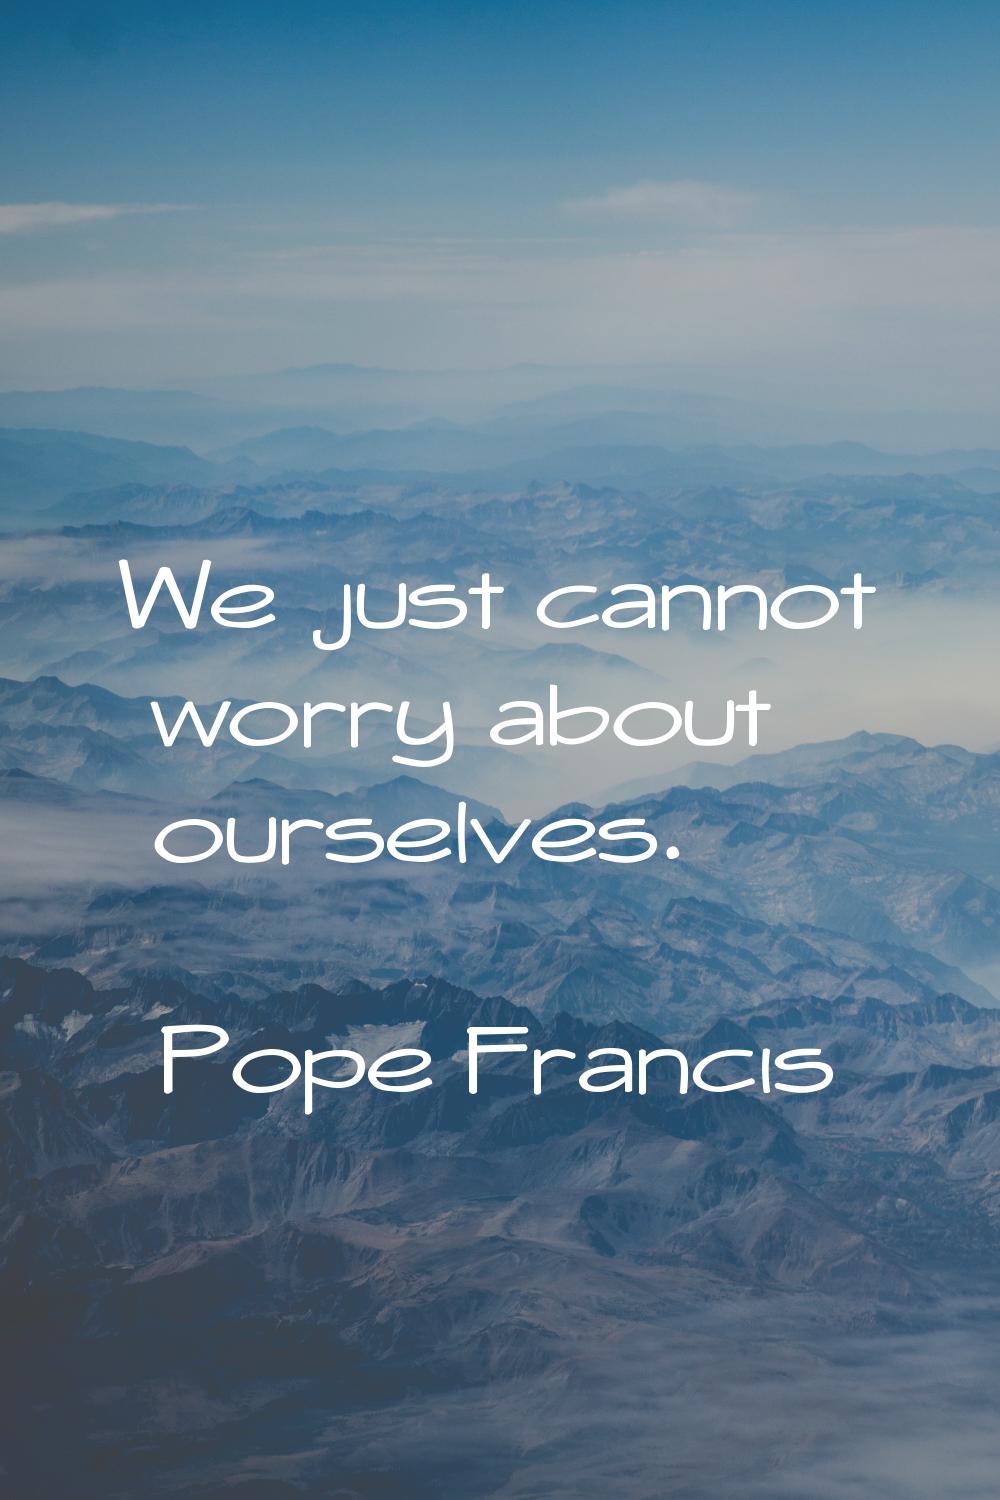 We just cannot worry about ourselves.